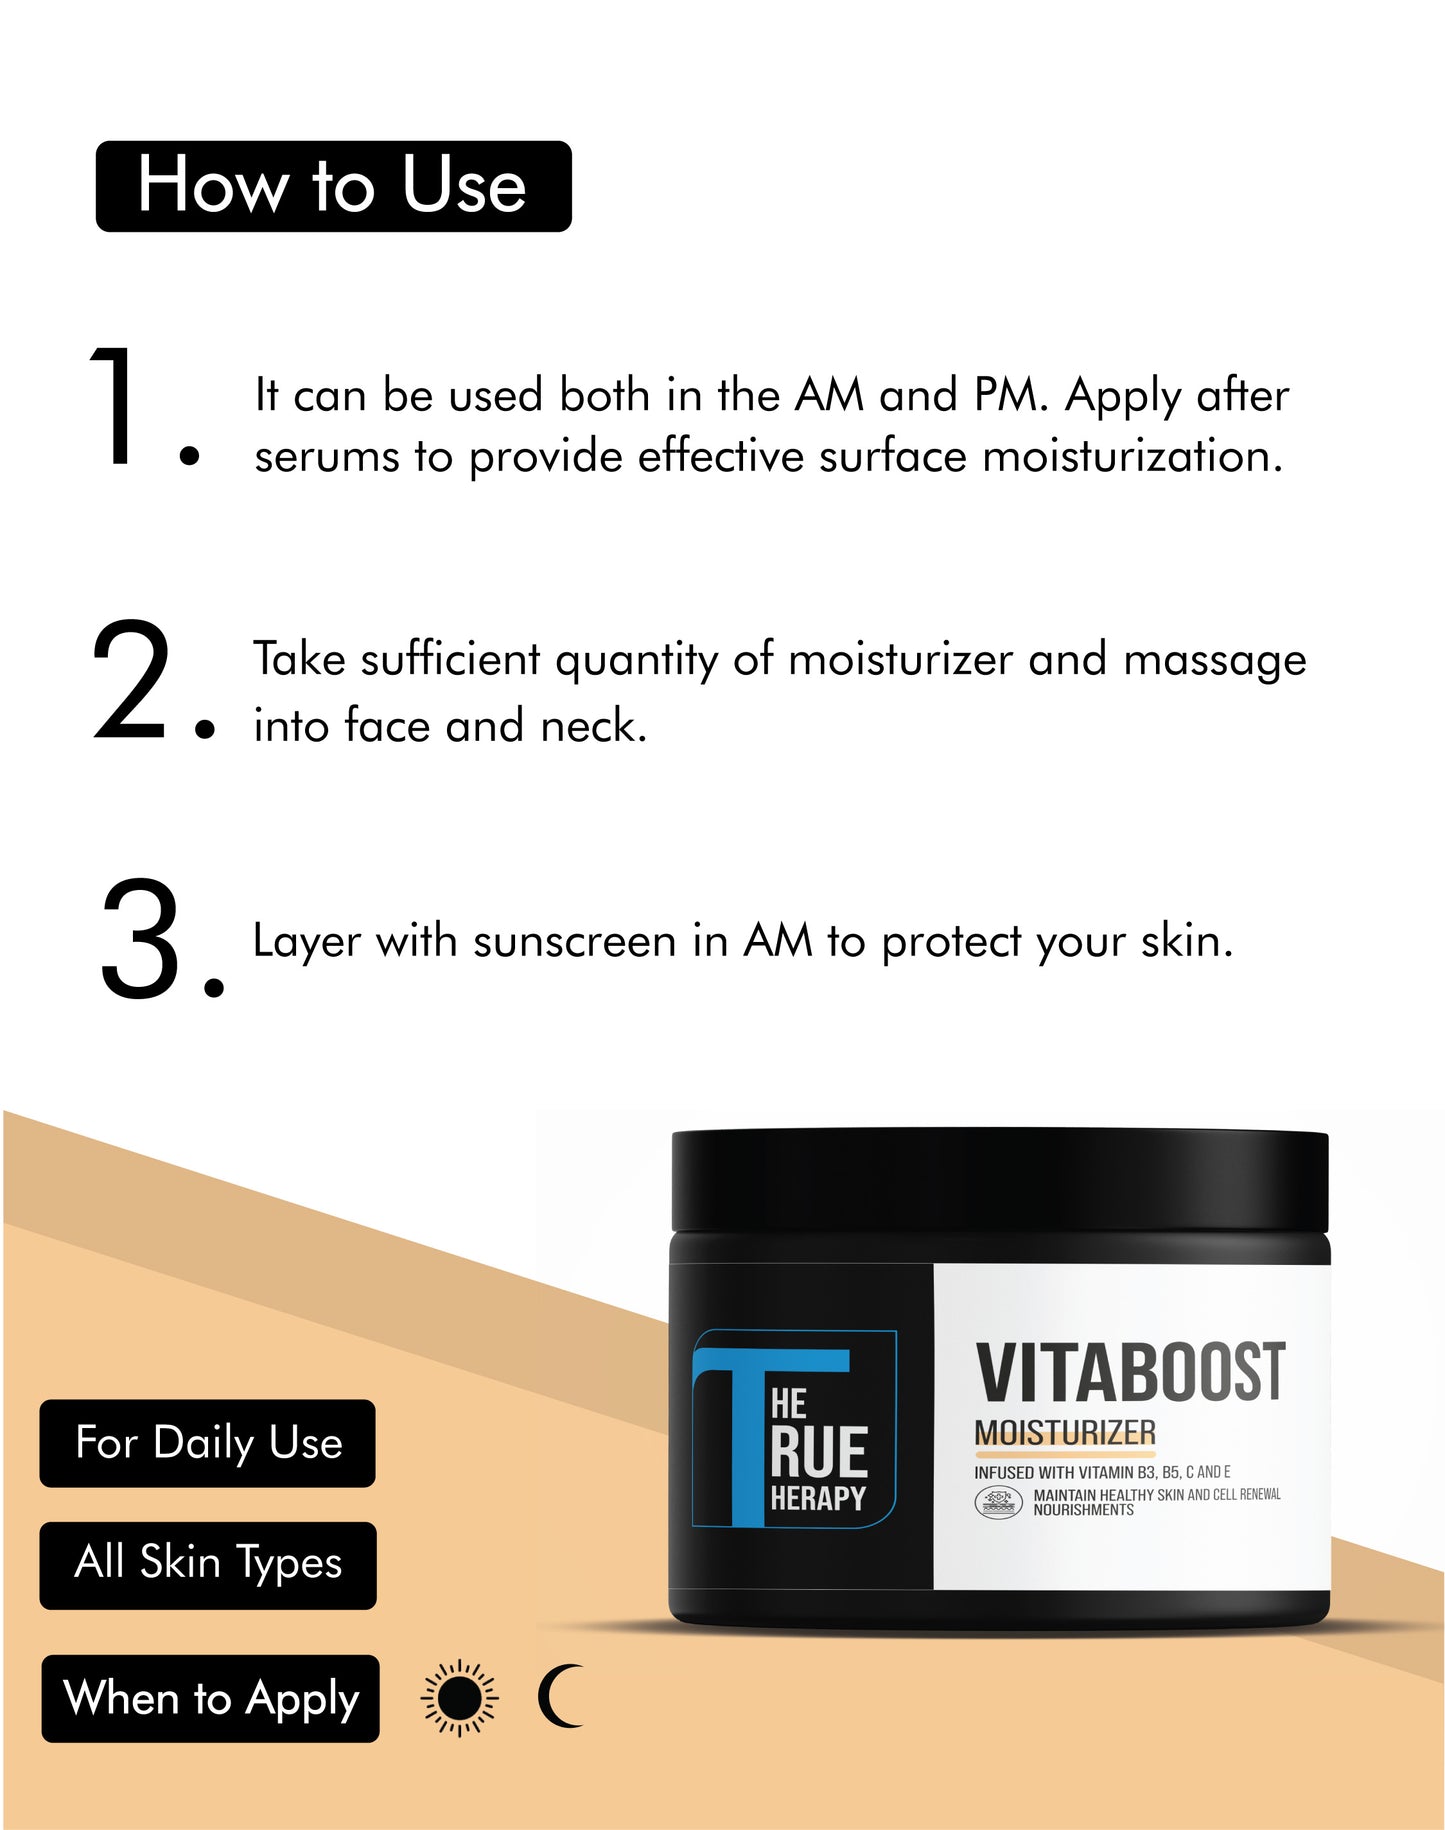 VITABOOST MOISTURIZER - How To Use - The True Therapy